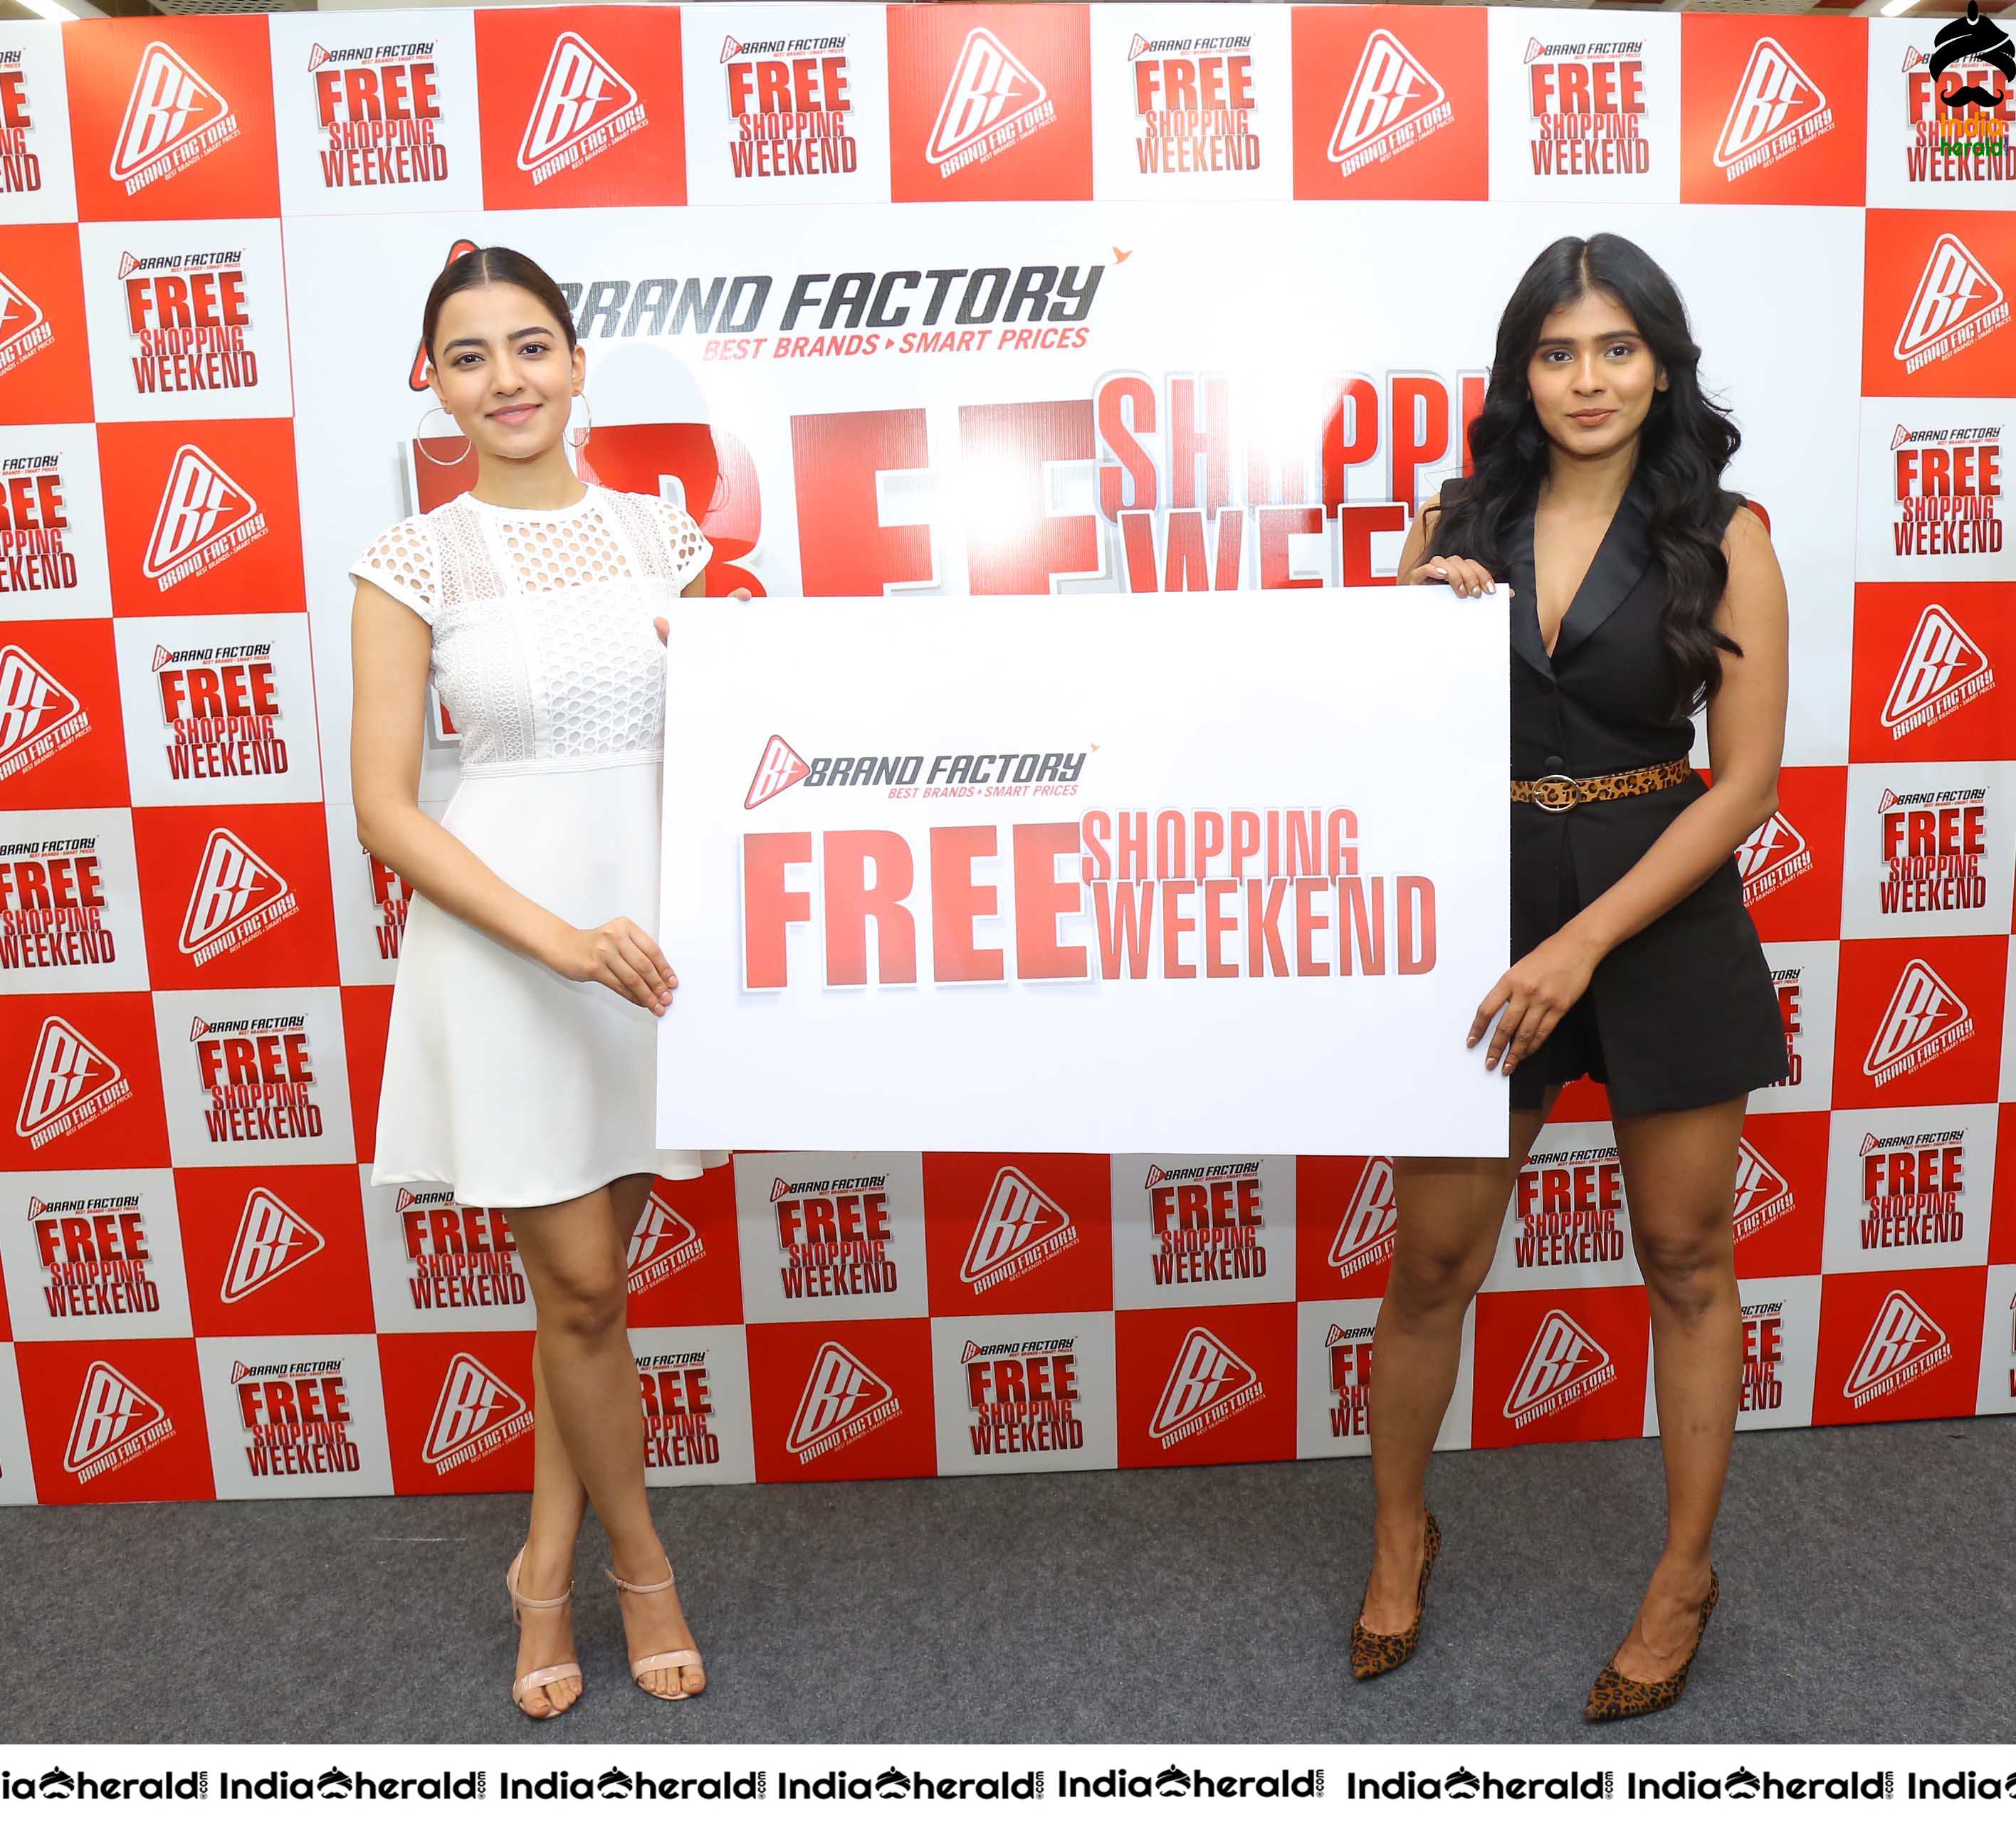 Hebah Patel and Rukshar Dillon Unveils Poster at Pre Launch Celebrations of Free Shopping Weekend by BRAND FACTORY Set 4